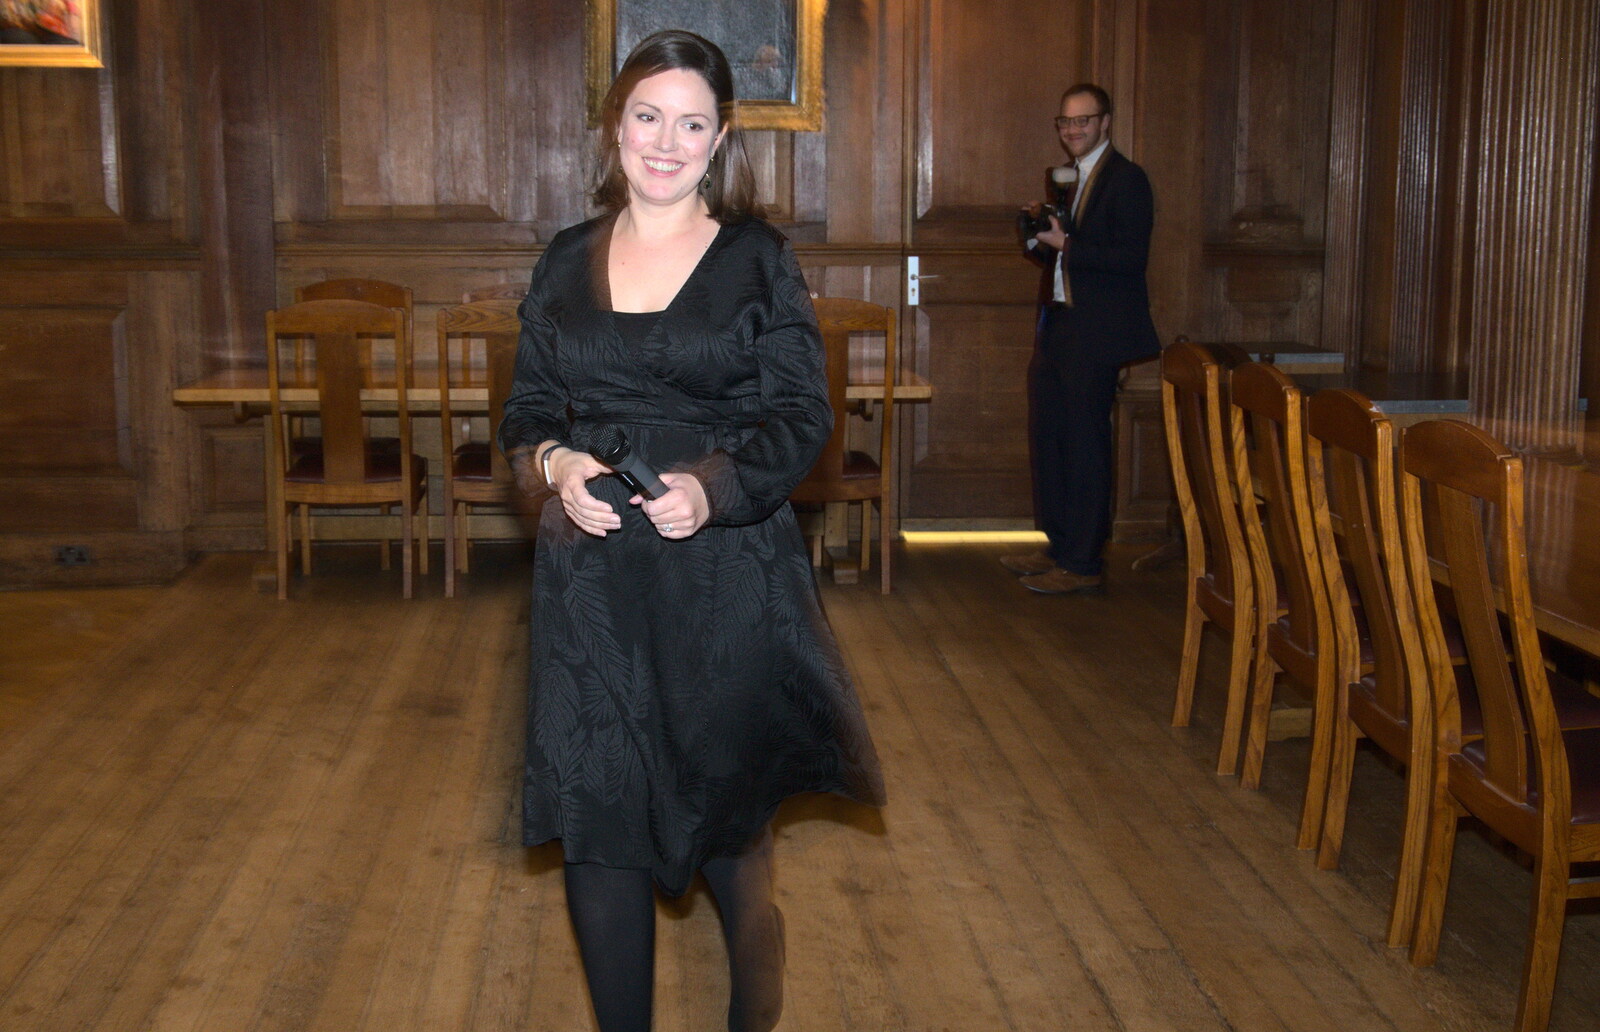 Ruth after a speech from SwiftKey's Ten Year Anniversary Reunion, Selwyn College, Cambridge - 11th January 2019